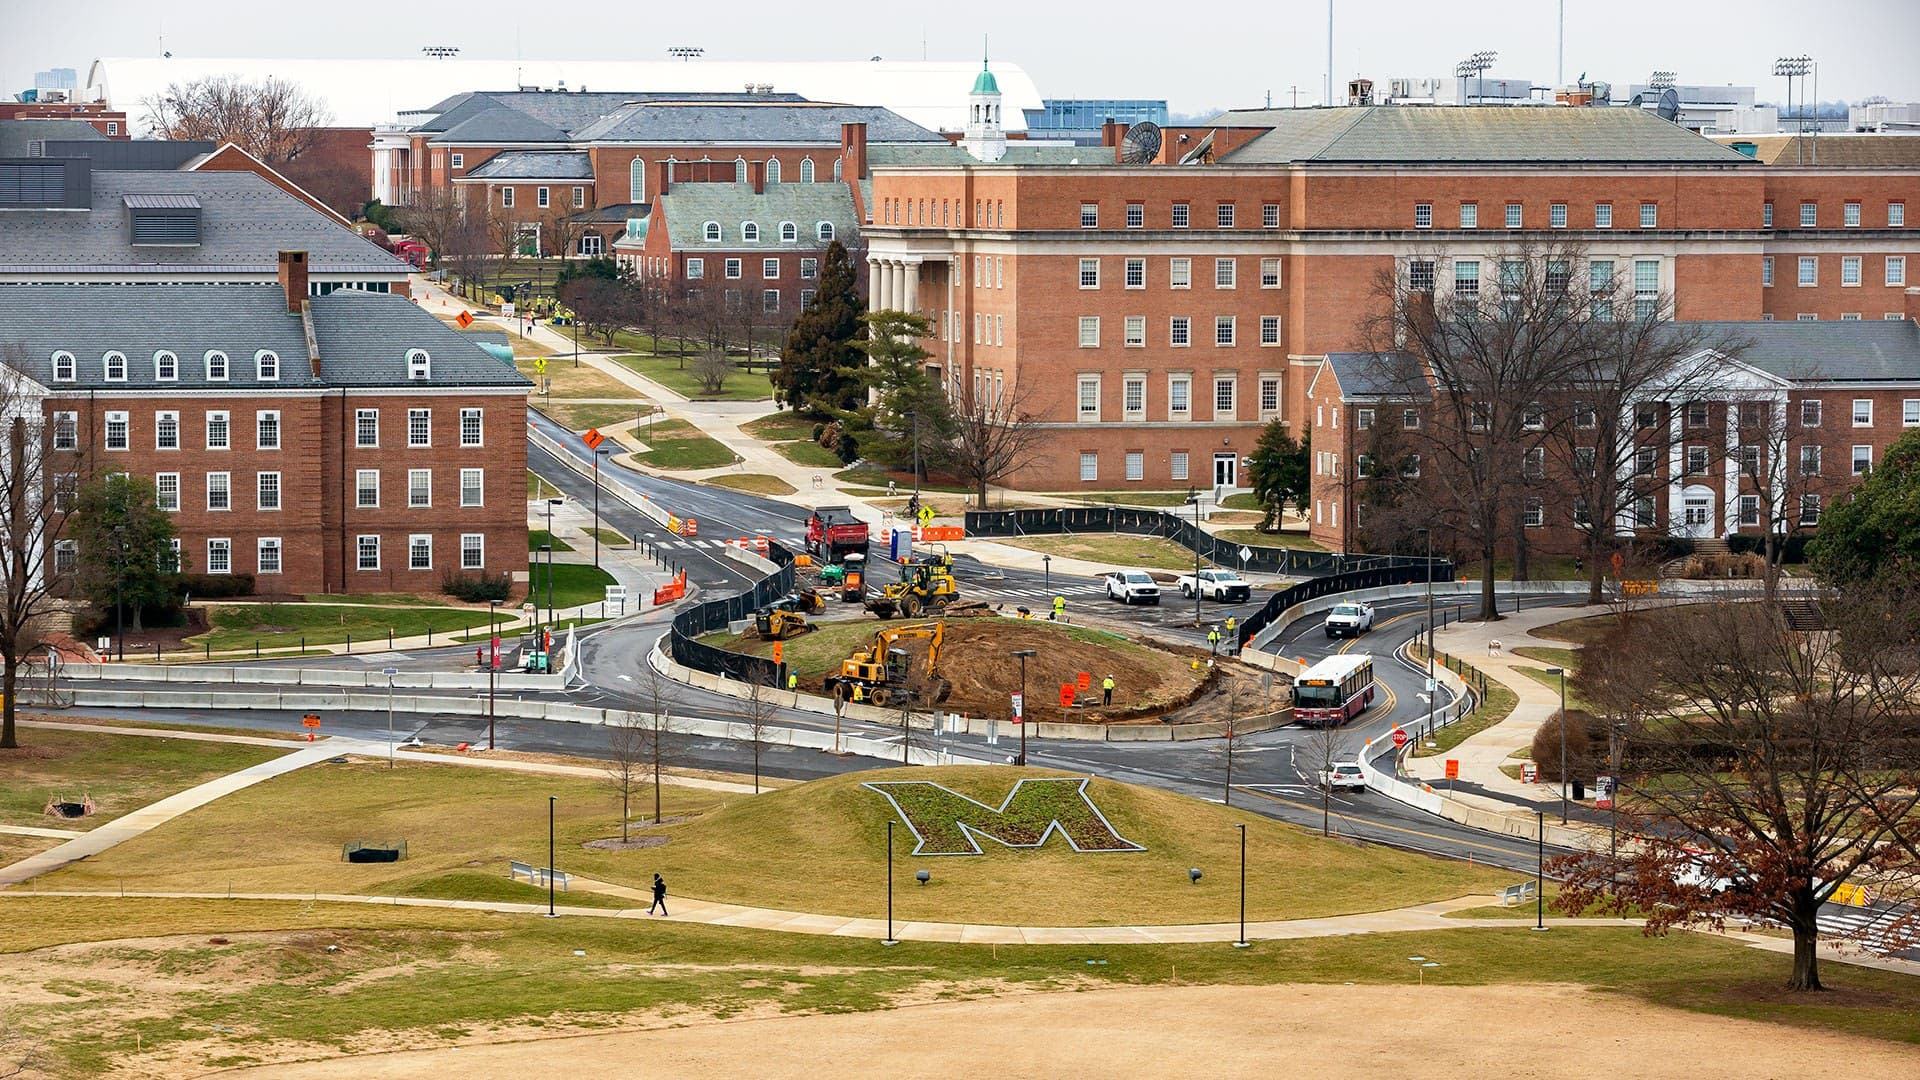 View of traffic circle at regents and campus drives from hotel upper floors